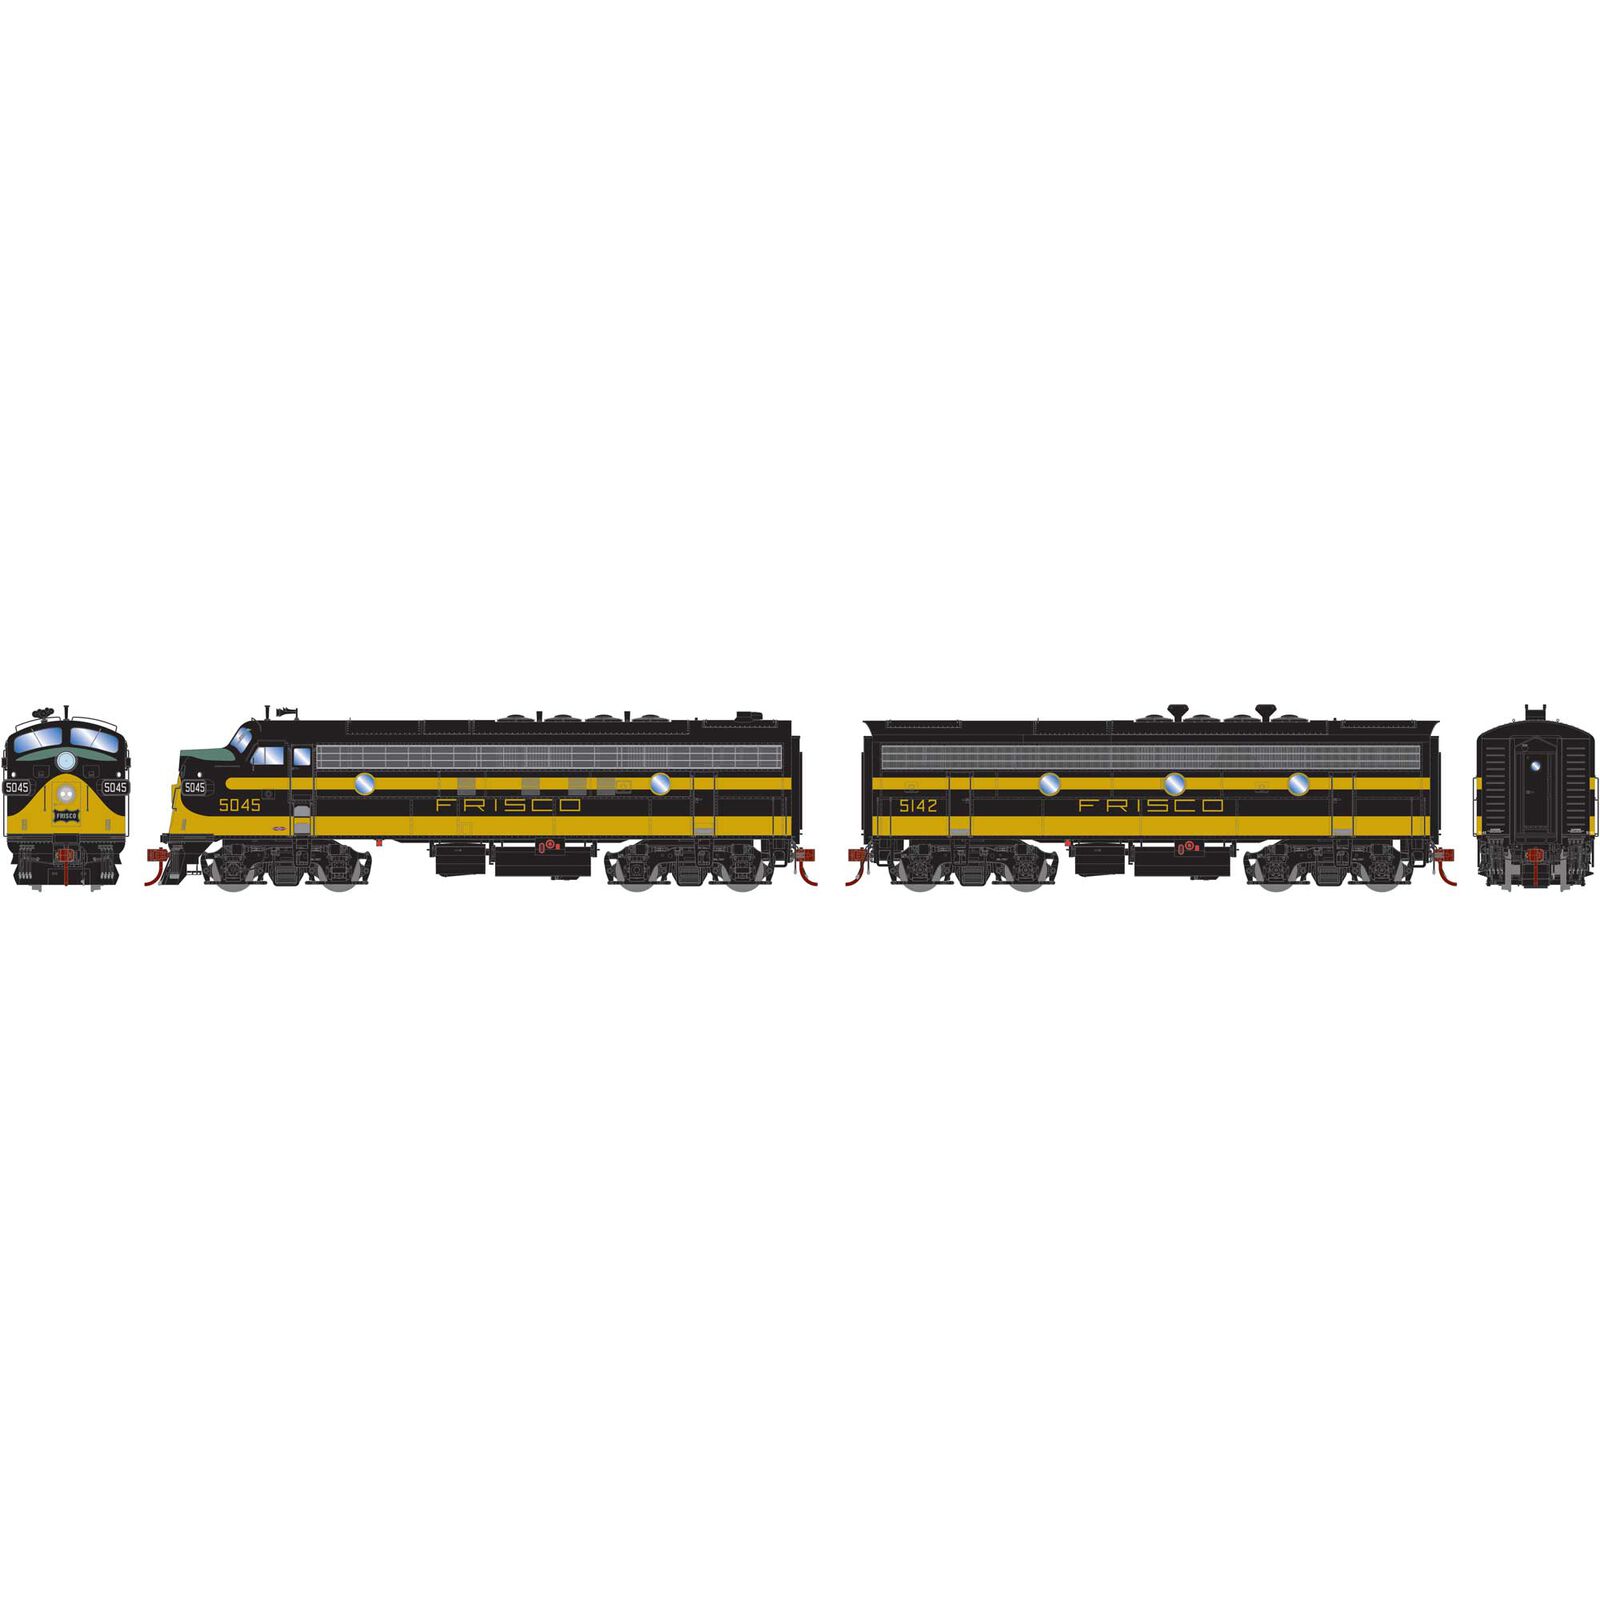 HO FP7A F9B with DCC & SND SLSF Blk & Yel #5045 #5142